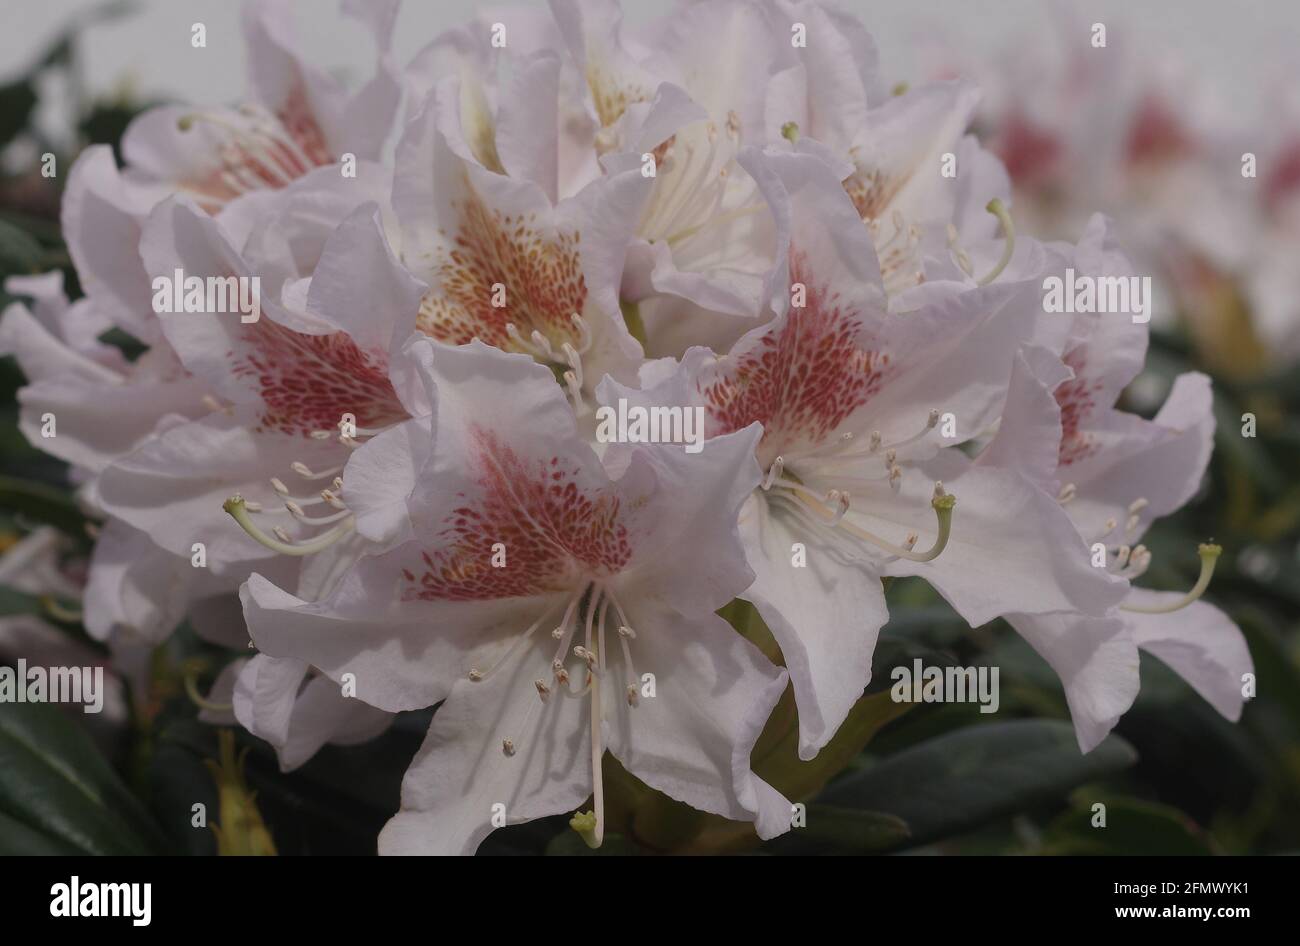 Blooming white rhododendron in the sunlight Stock Photo